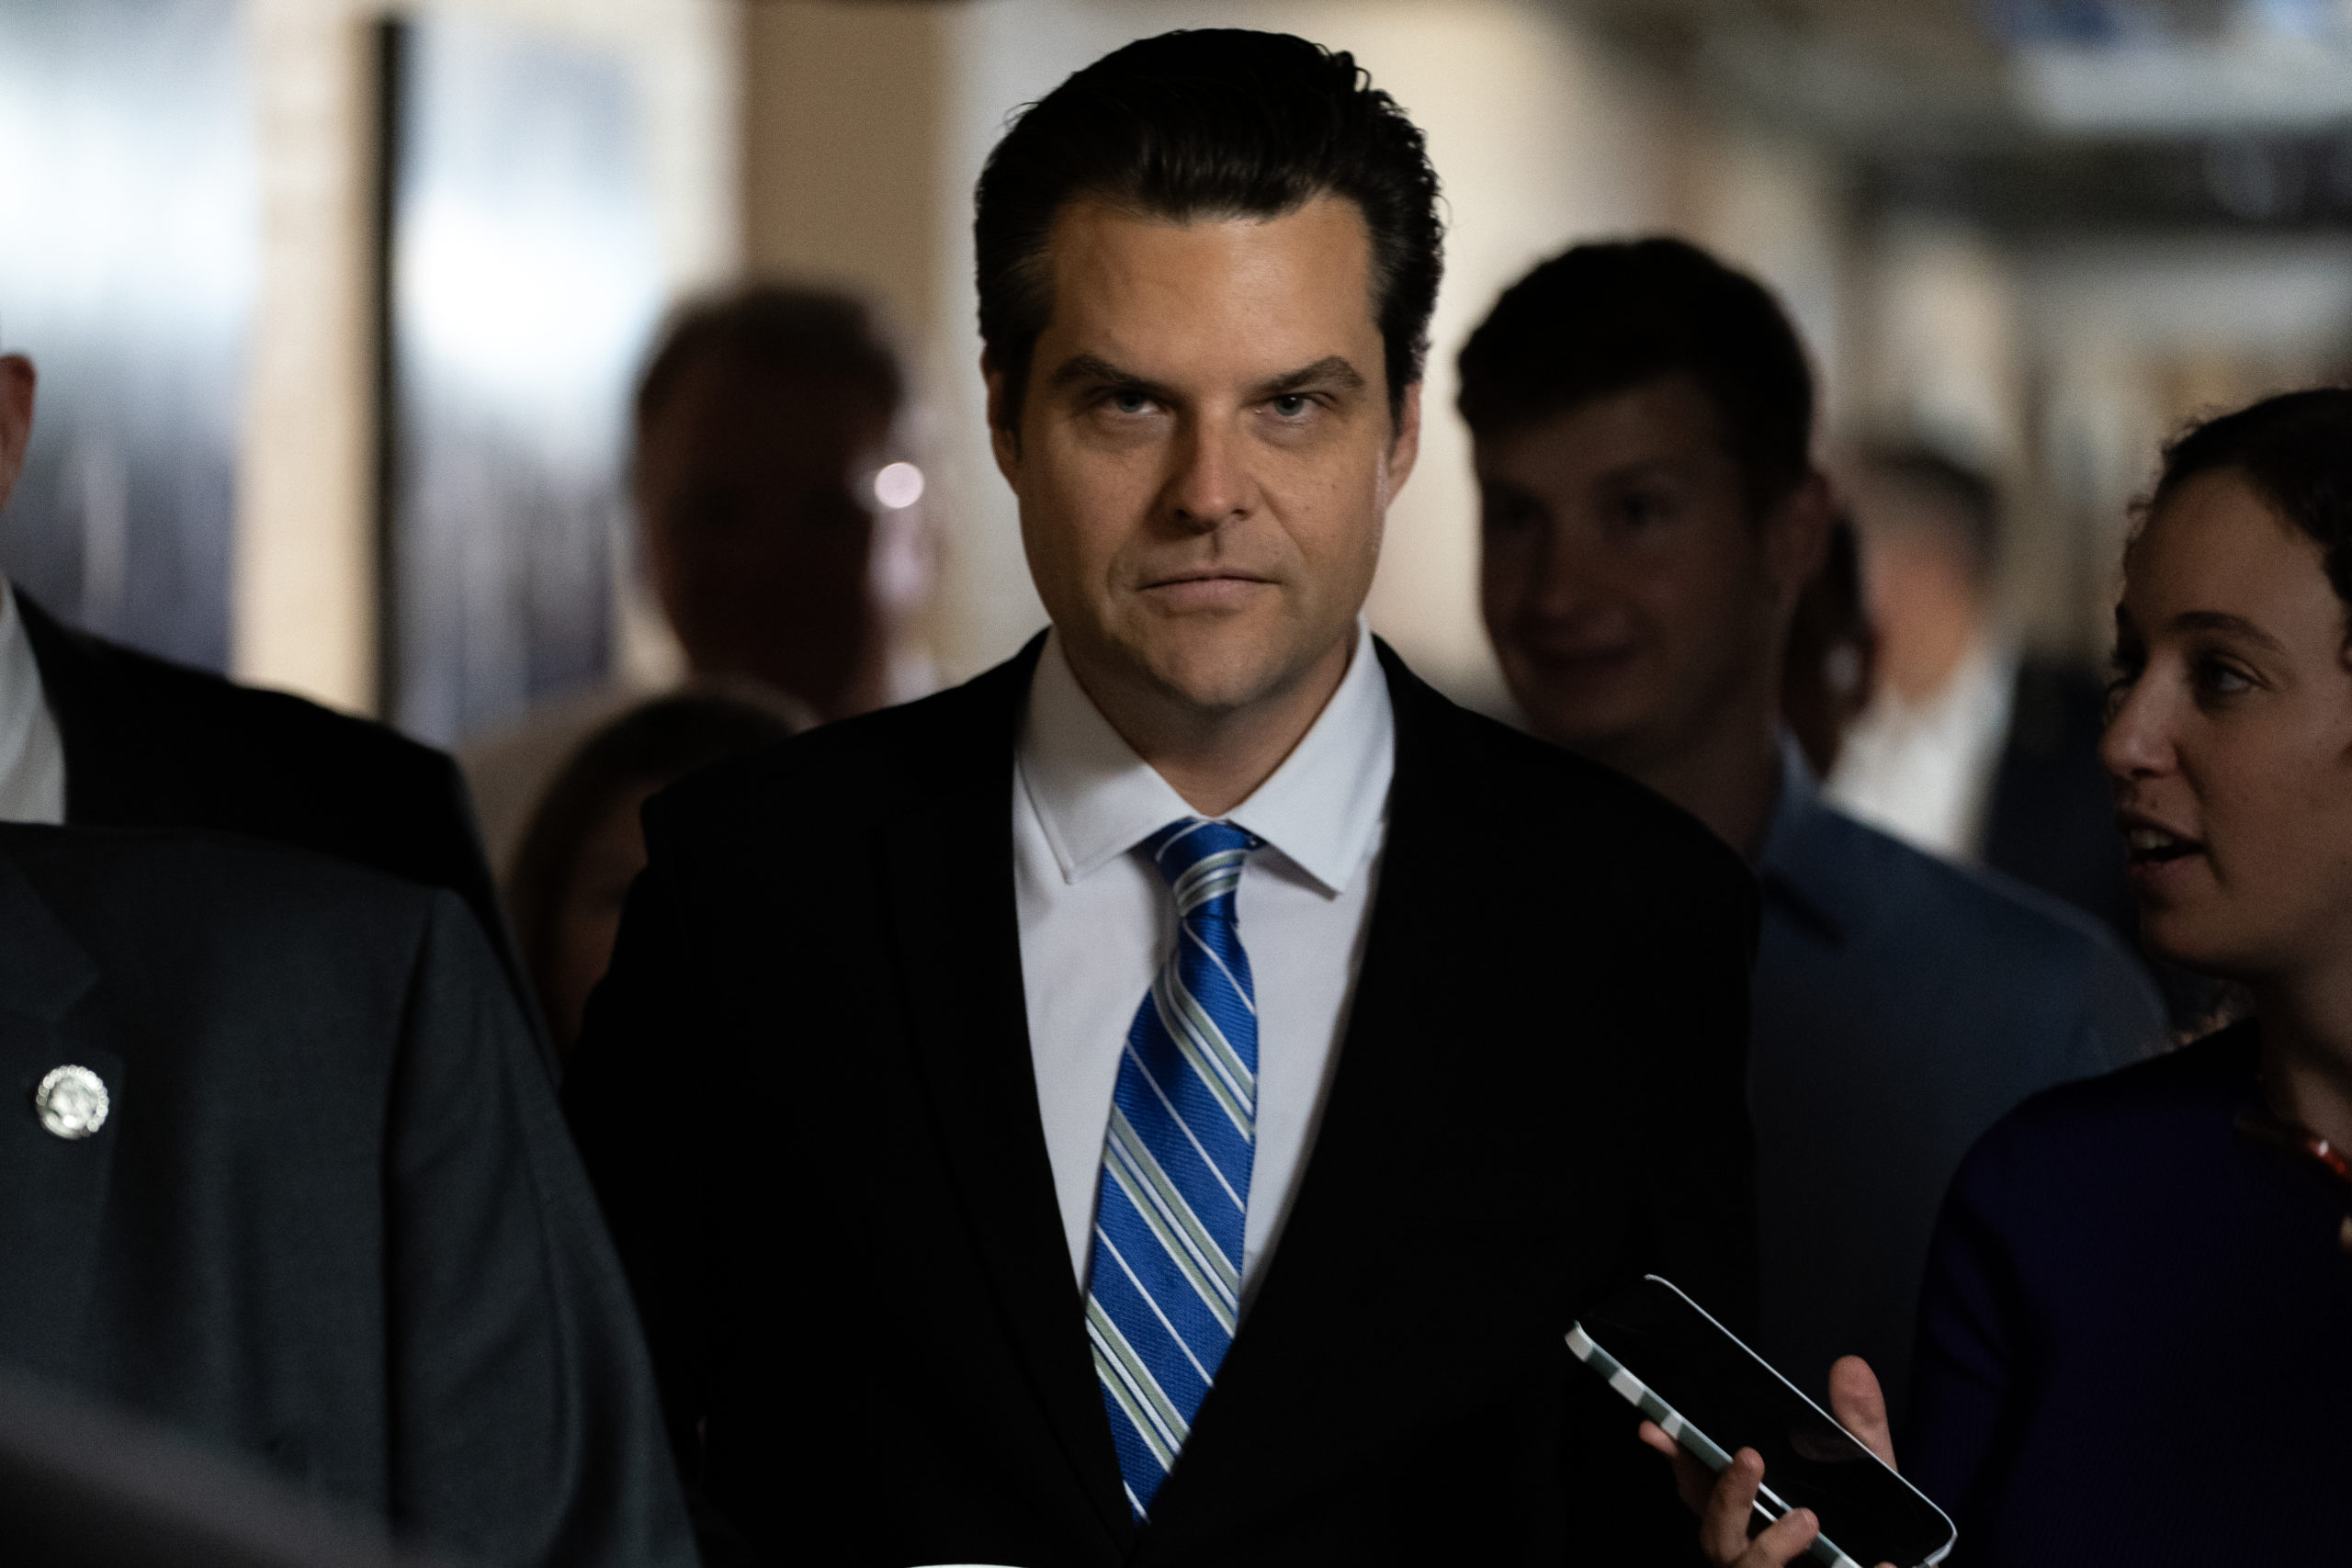 WASHINGTON, DC - SEPTEMBER 30: House Freedom Caucus member Rep. Matt Gaetz (R-FL) arrives for a meeting of the Republican House caucus on September 30, 2023 in Washington, DC. The government is expected to enter a shutdown at midnight if a last-minute budget deal is not reached by the House on Saturday. (Photo by Nathan Howard/Getty Images)